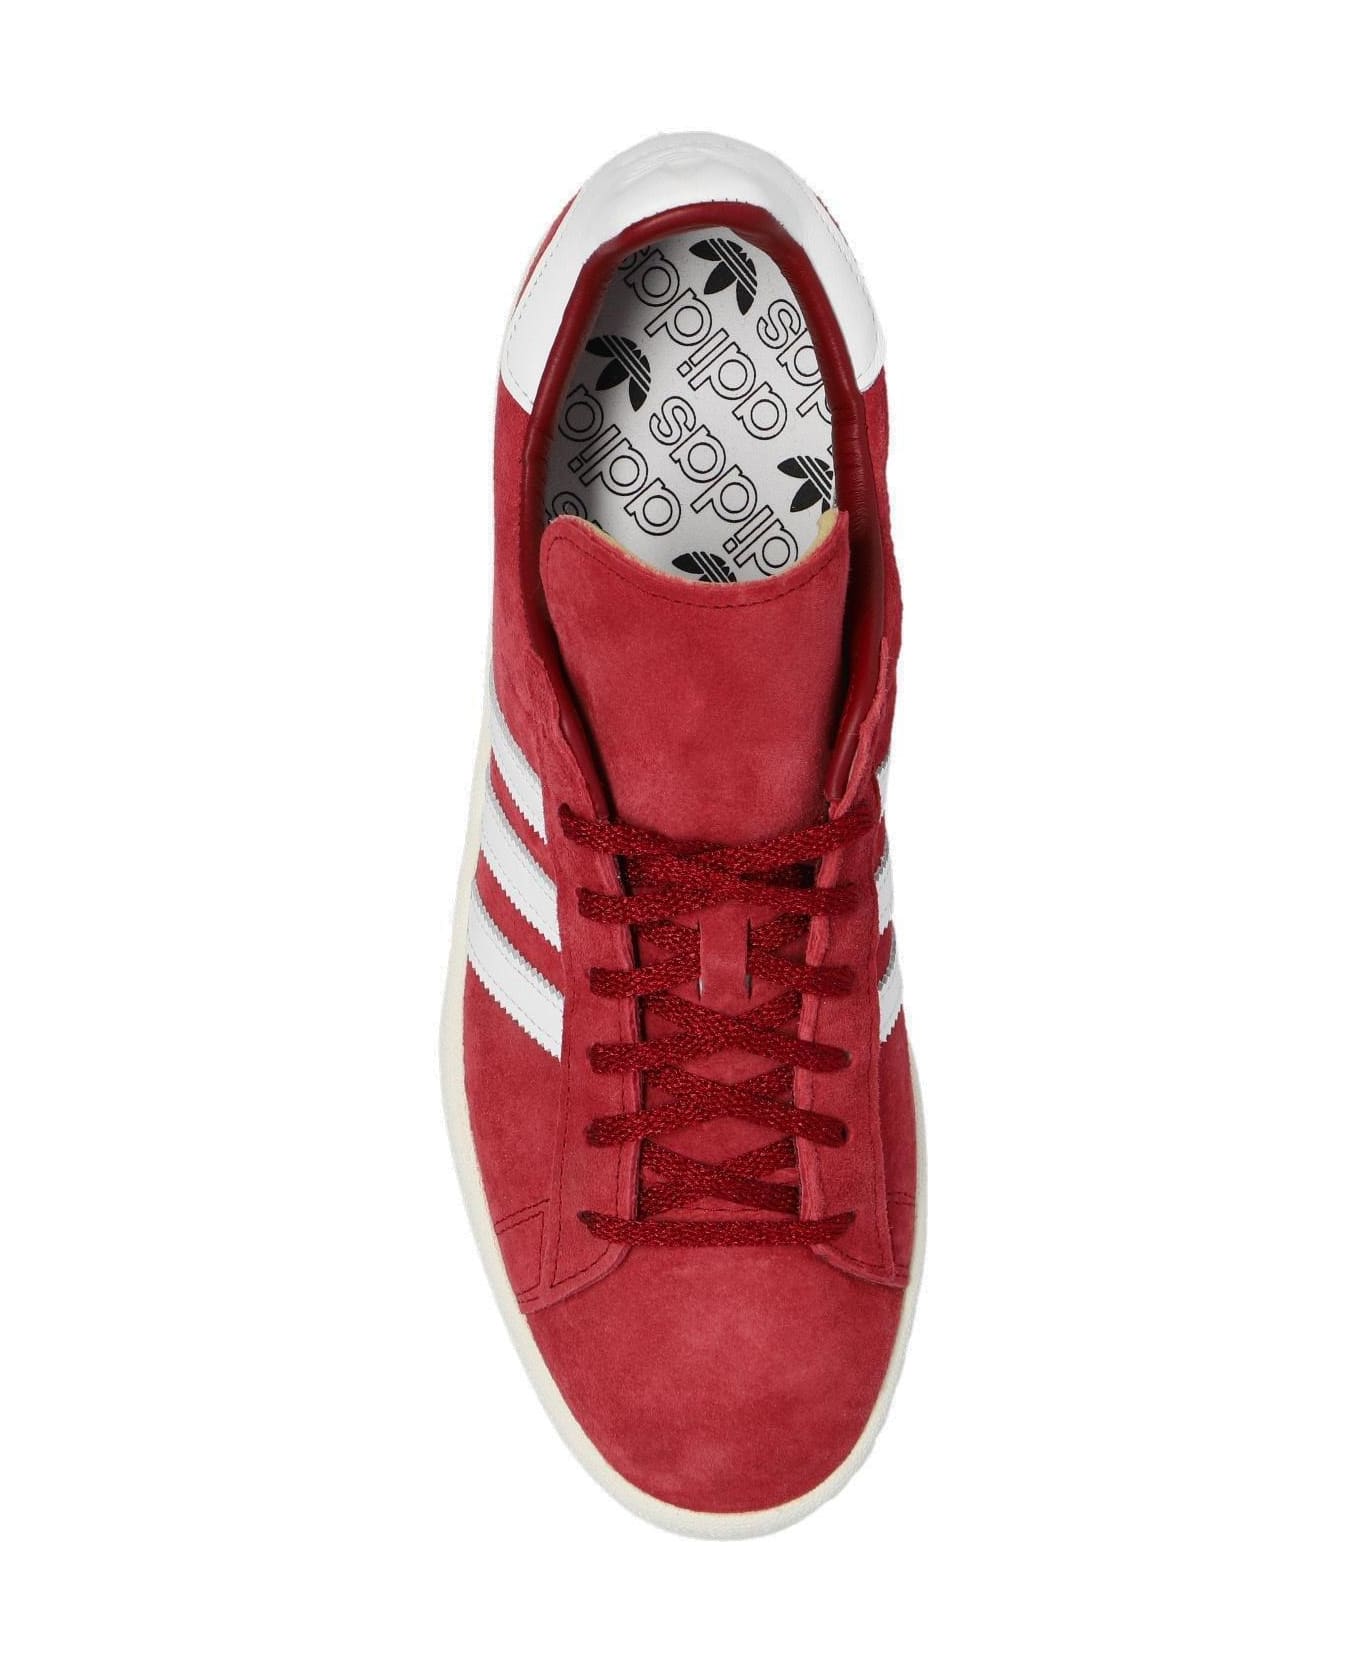 Adidas Campus 80s Lace-up Sneakers - RED